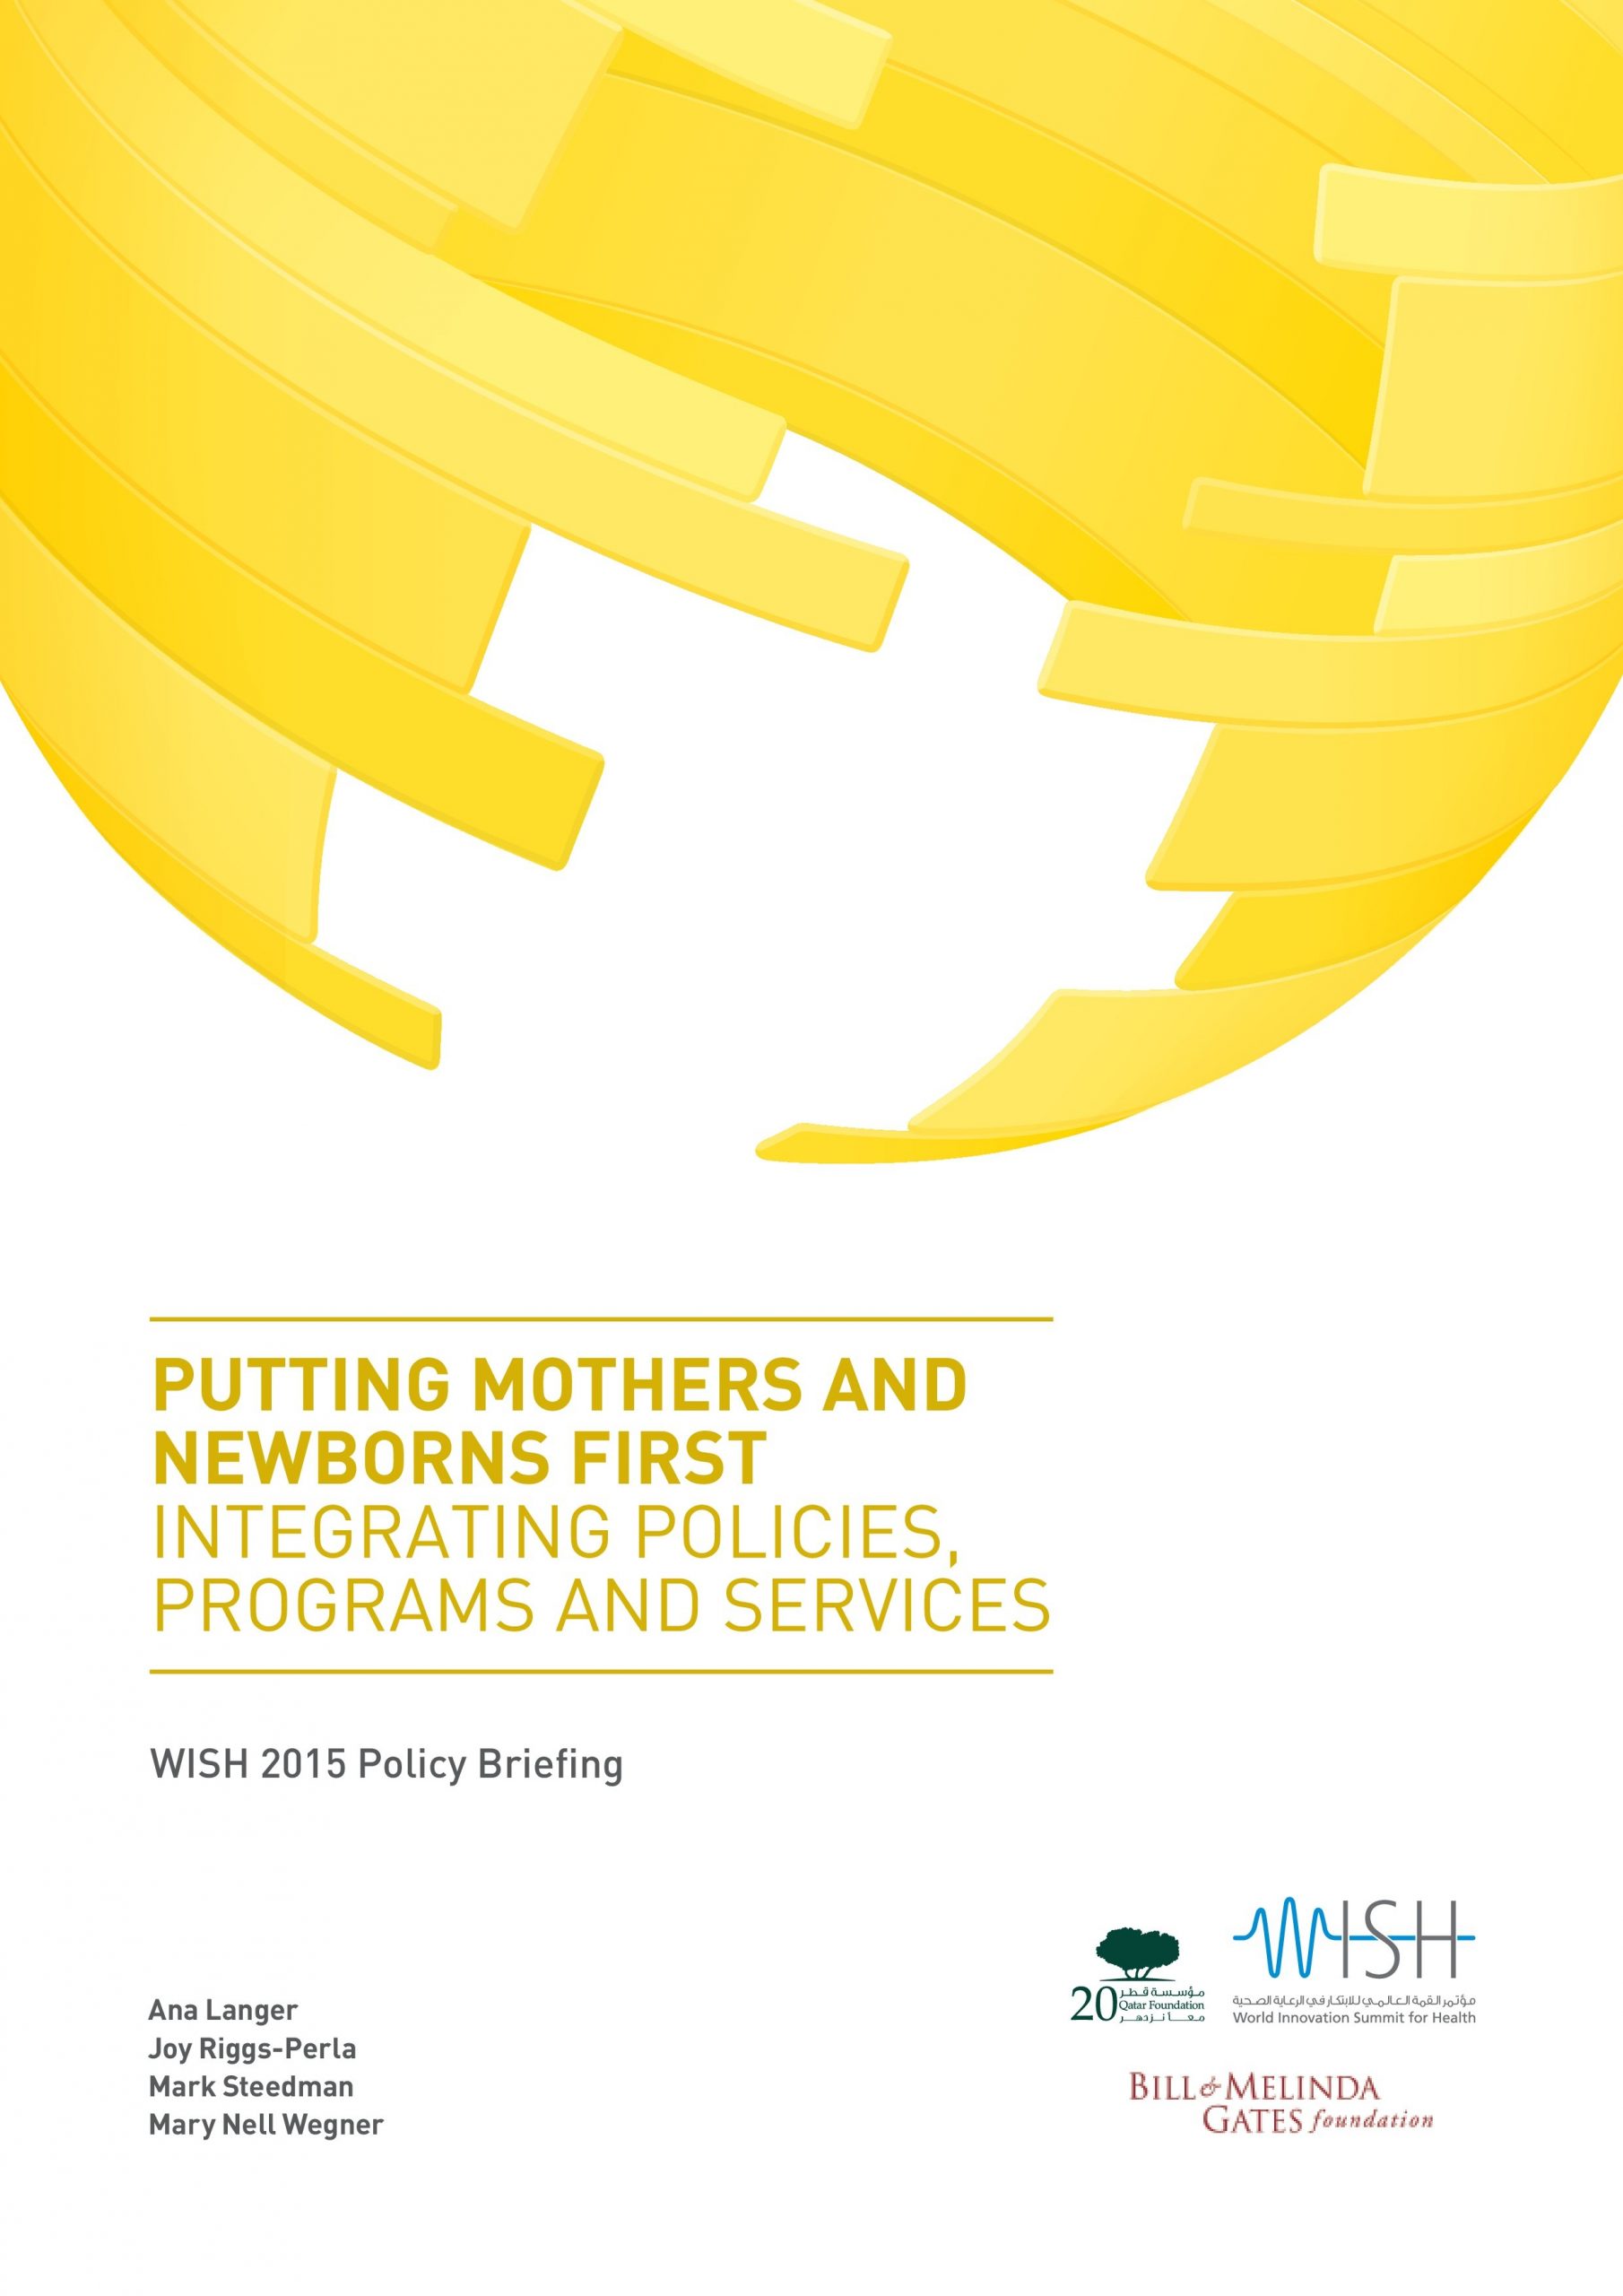 Putting Mothers and Newborns First: Integrating Policies, Programs and Services